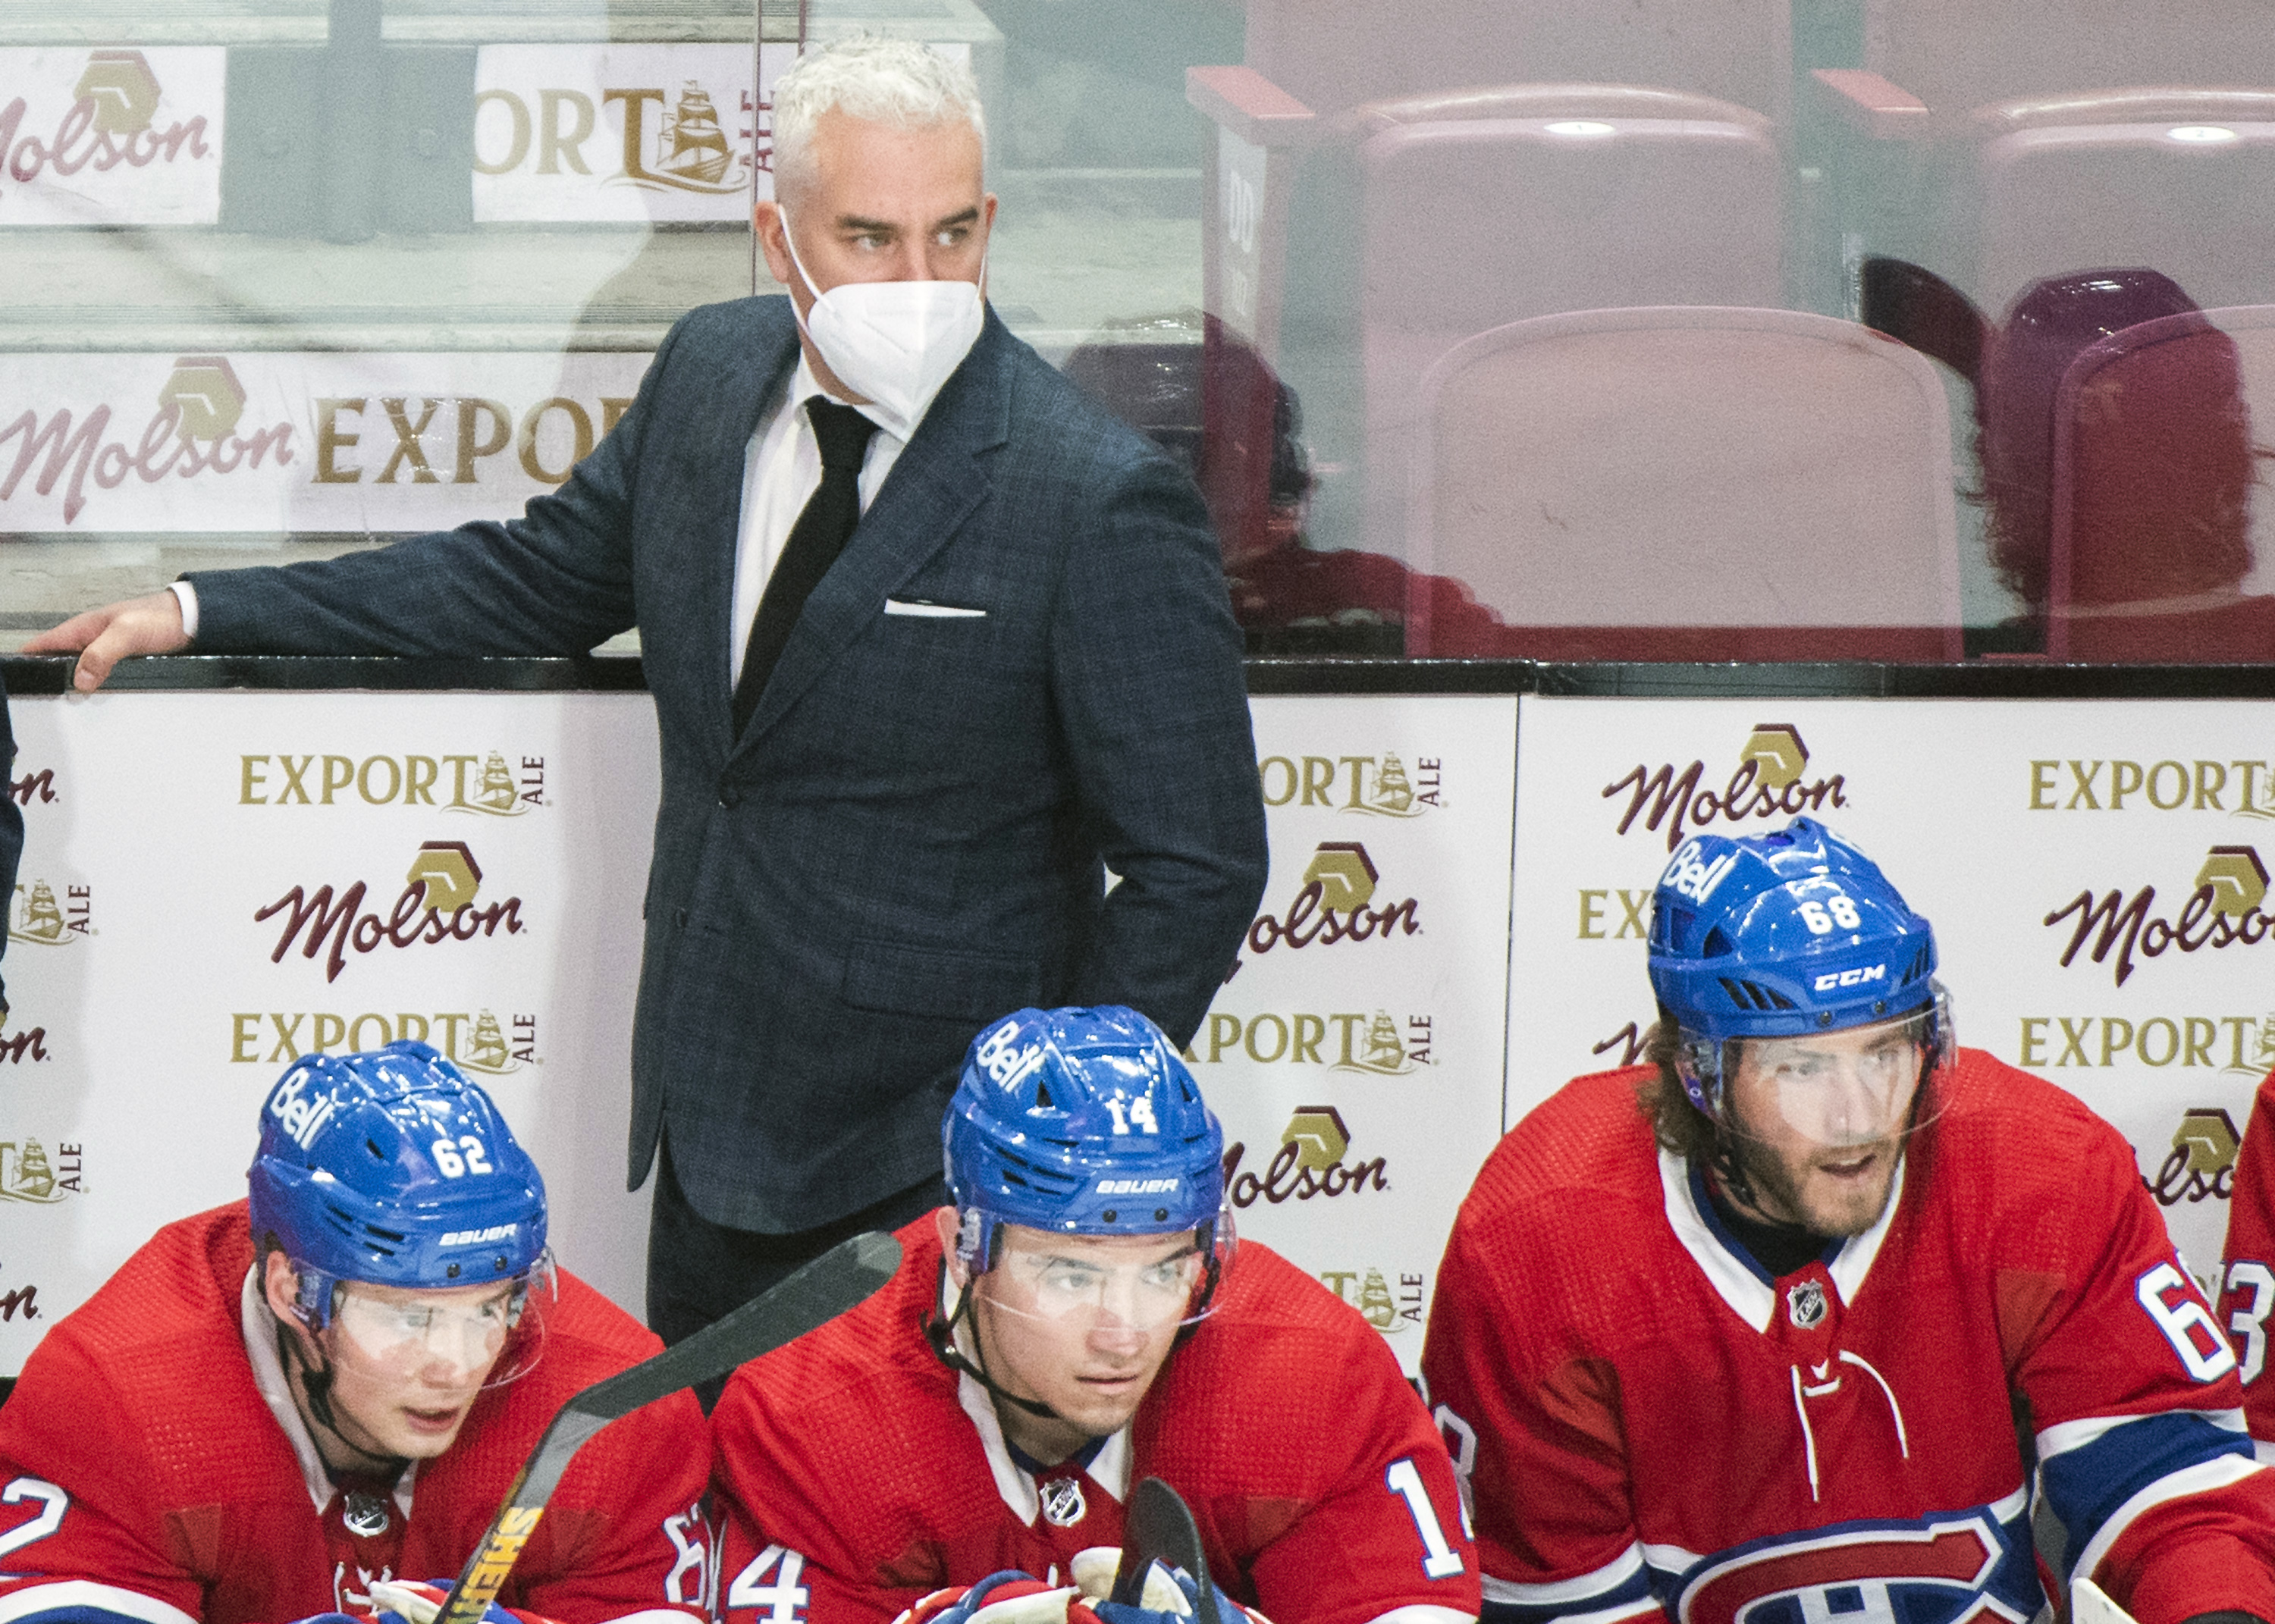 Montreal Canadiens team owner explains decision to fire Habs leadership